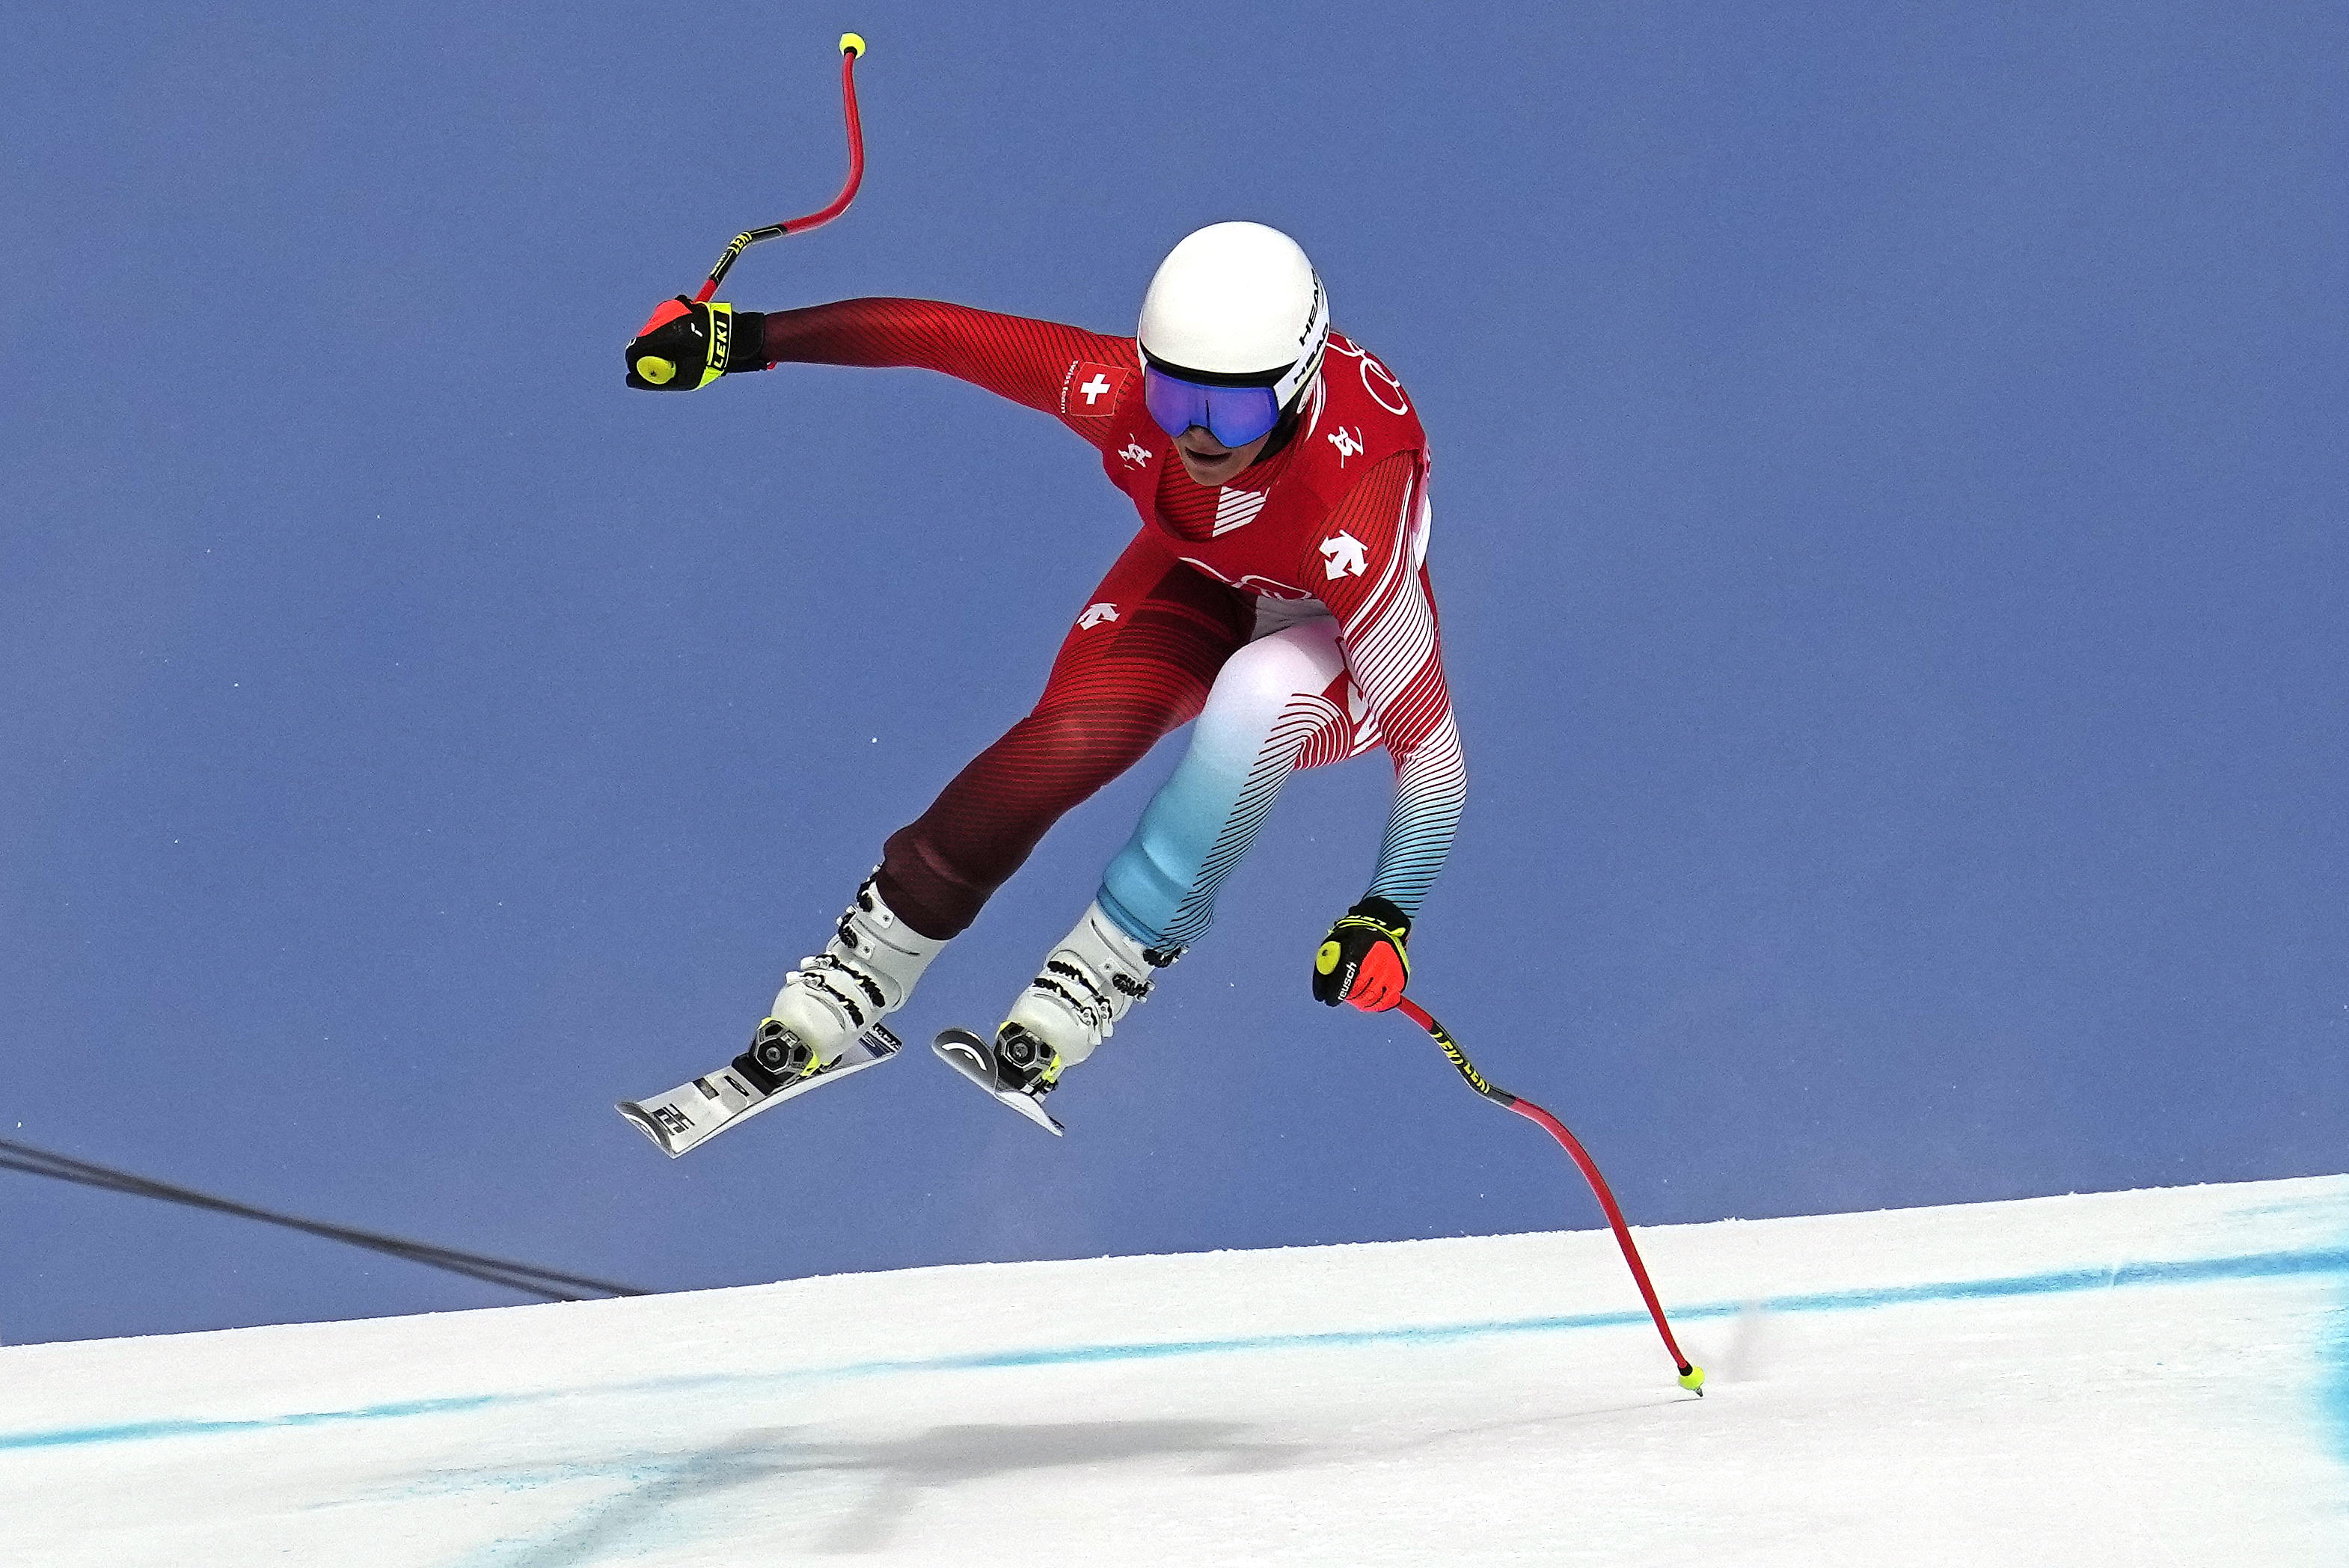 Olympic Women’s Alpine Skiing Results: Medal Winners for Downhill; Shiffrin Gets 18th